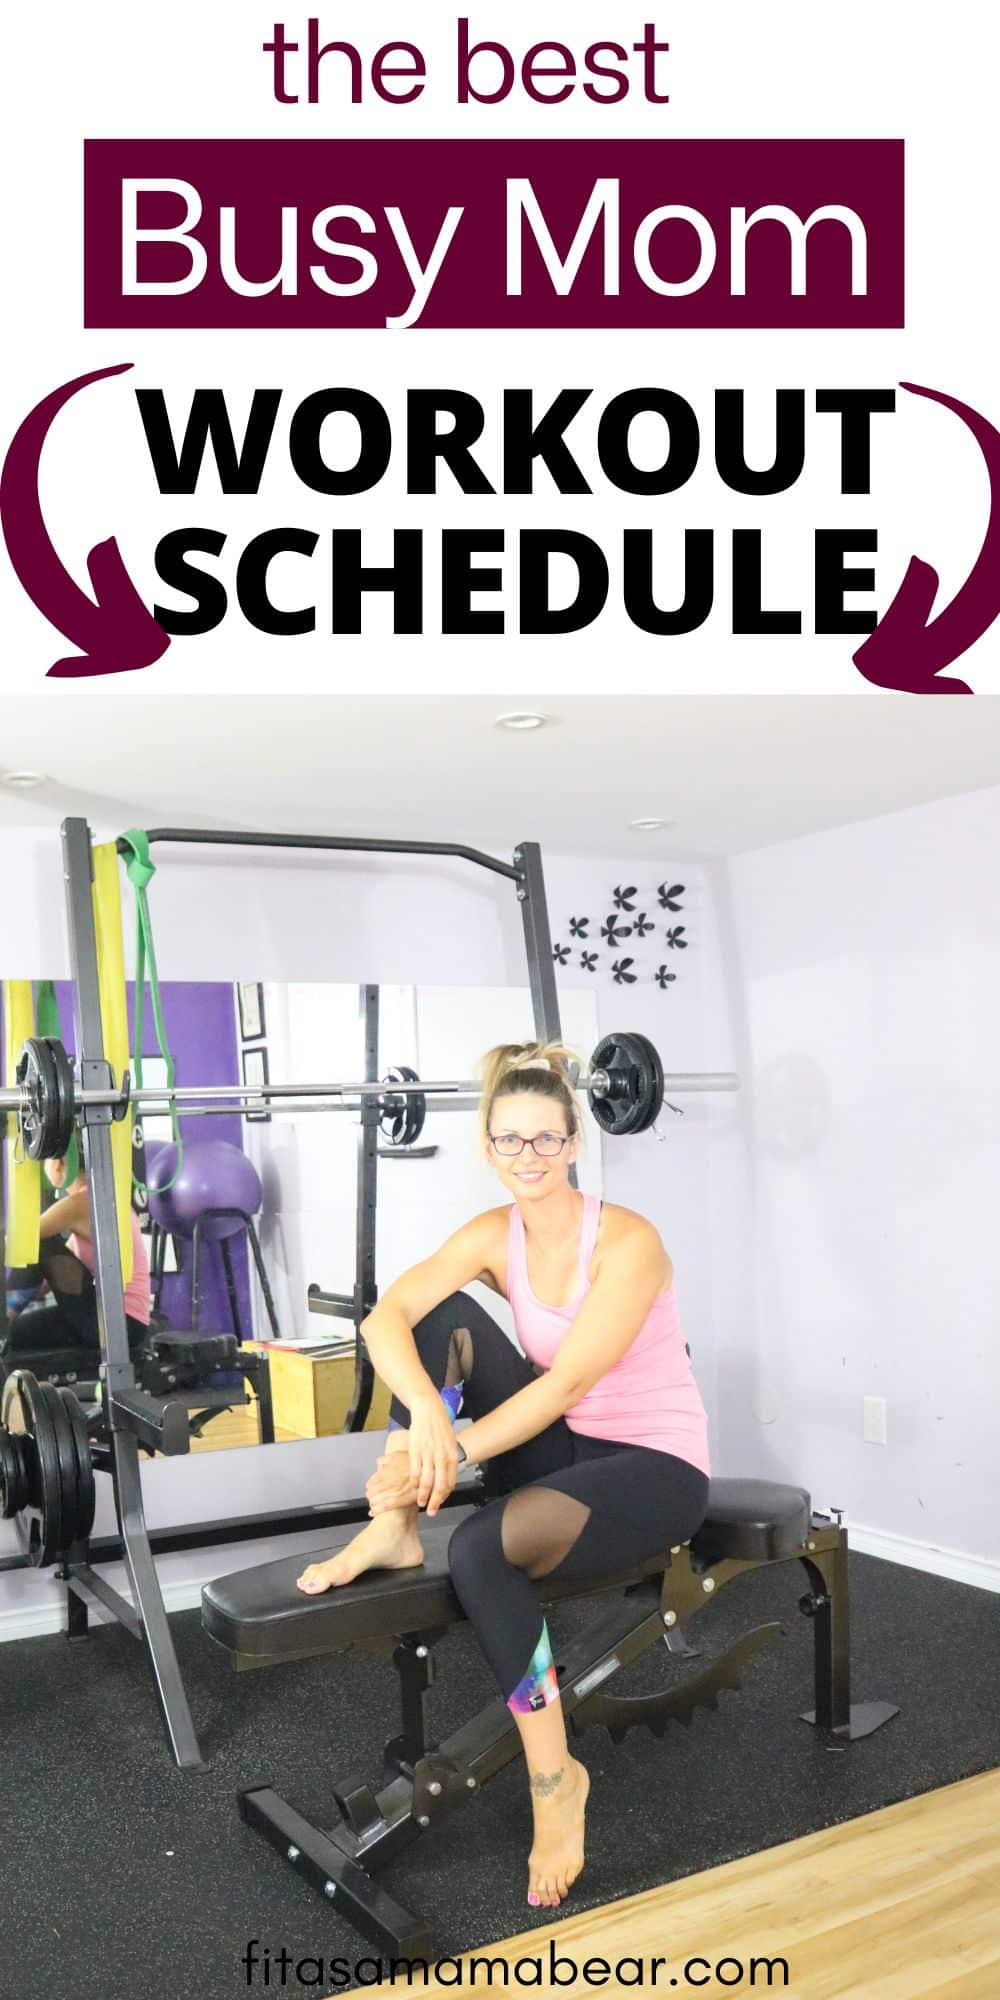 Pin image with text: woman in pink shirt and black pants sitting on a workout bench in a home gym with text about workout routines for busy moms